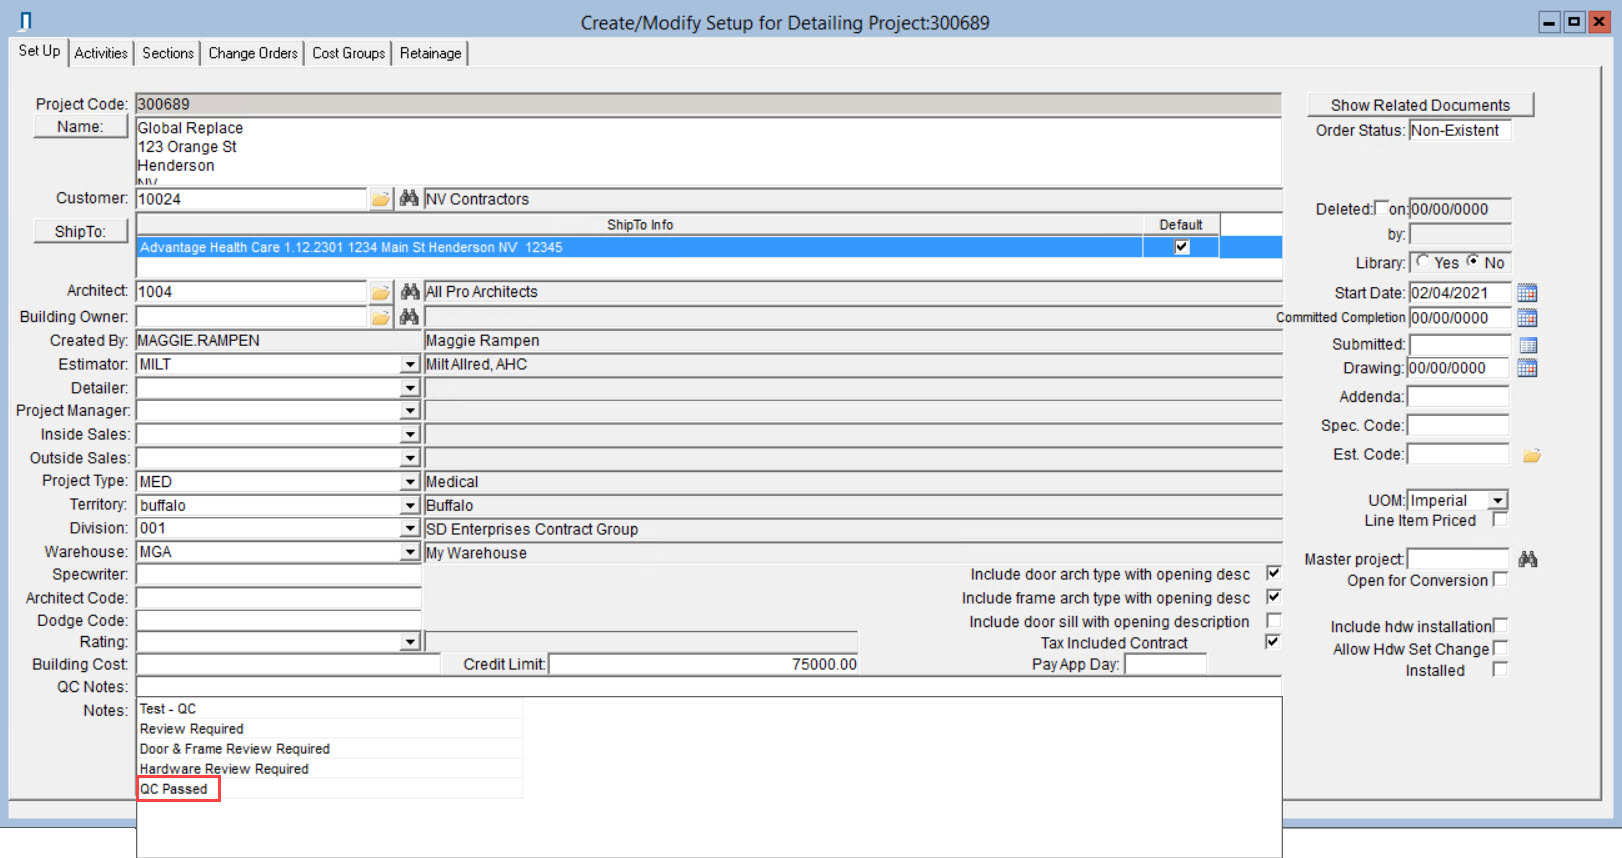 Projects window; shows the QC Notes field drop-down list.